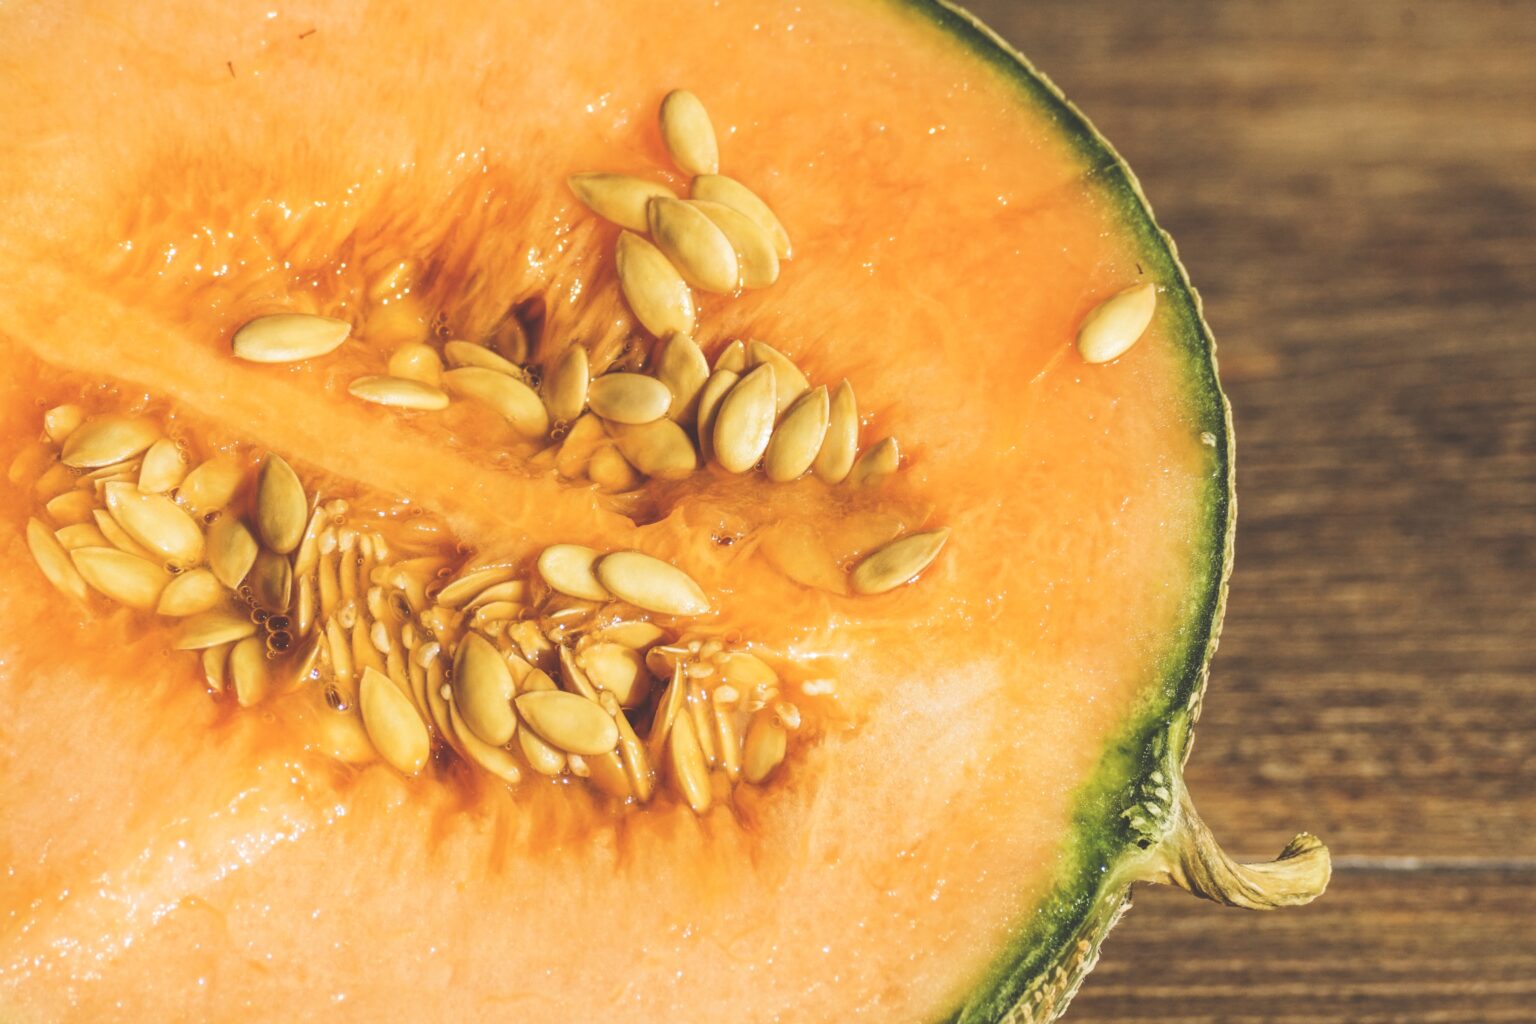 Is Cantaloupe Good For Weight Loss?